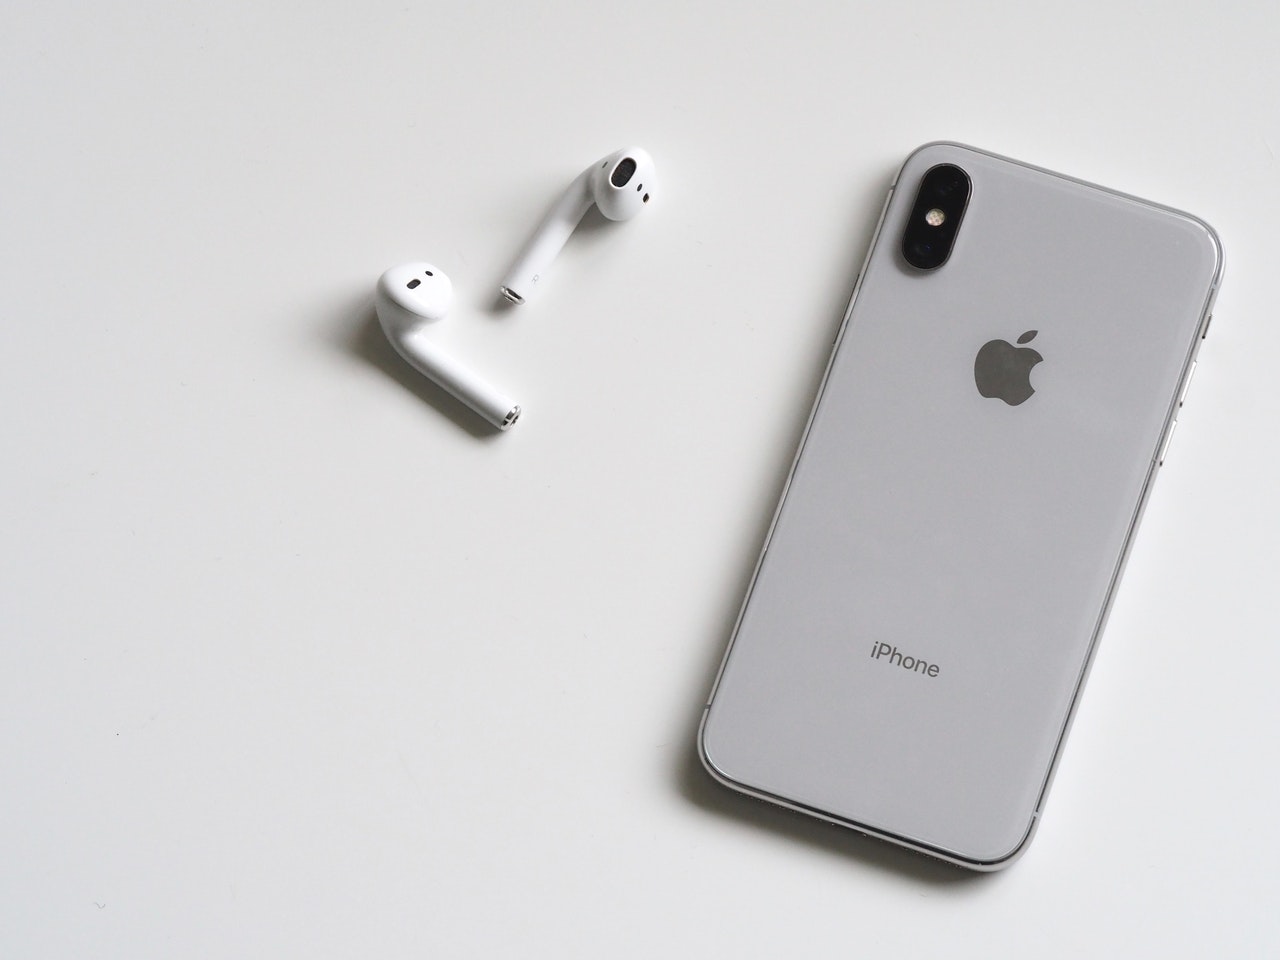 Grey Iphone mobile with earbuds